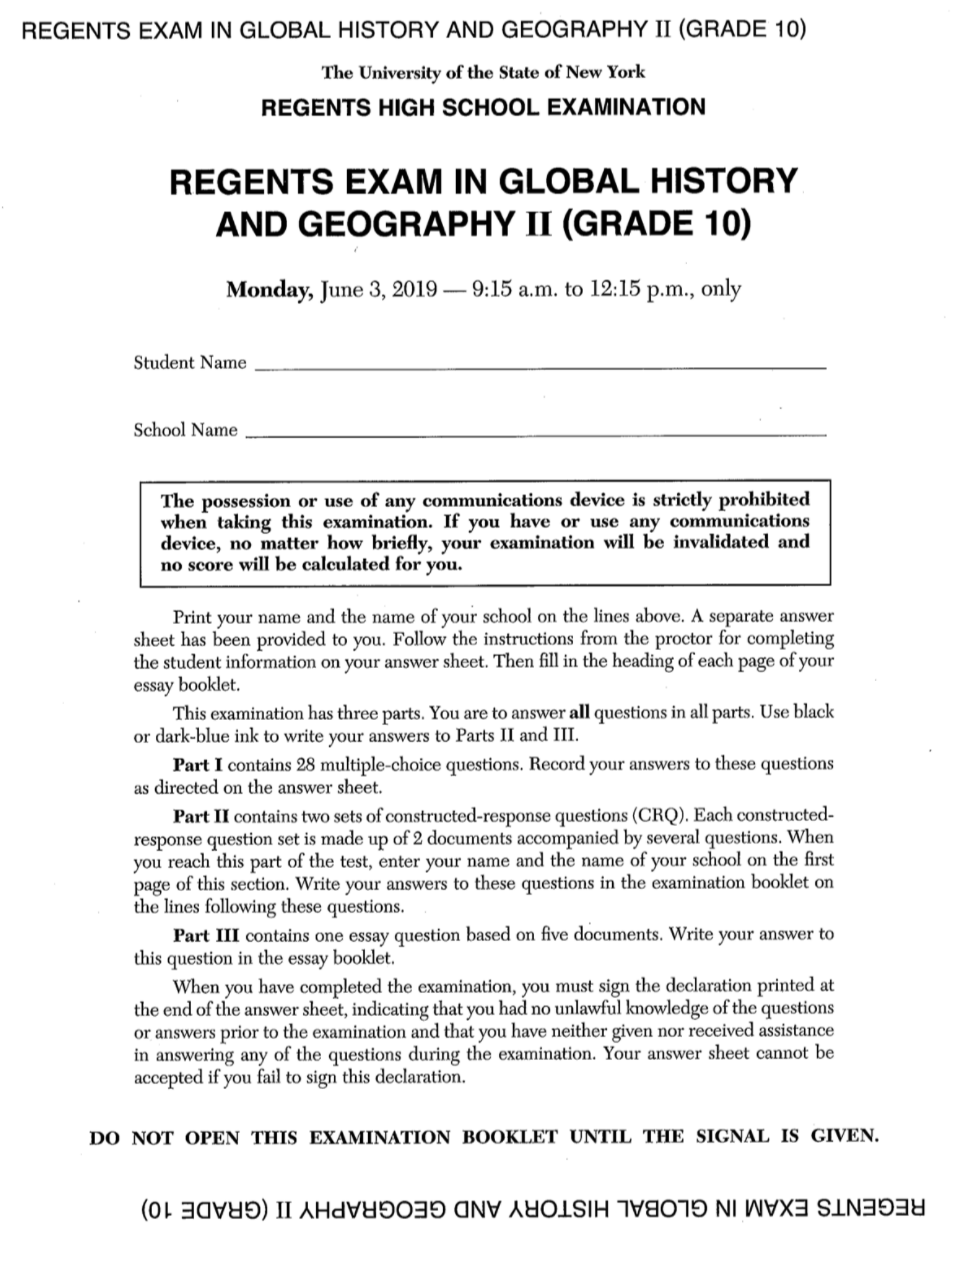 Global History And Geography Regents Conversion Chart